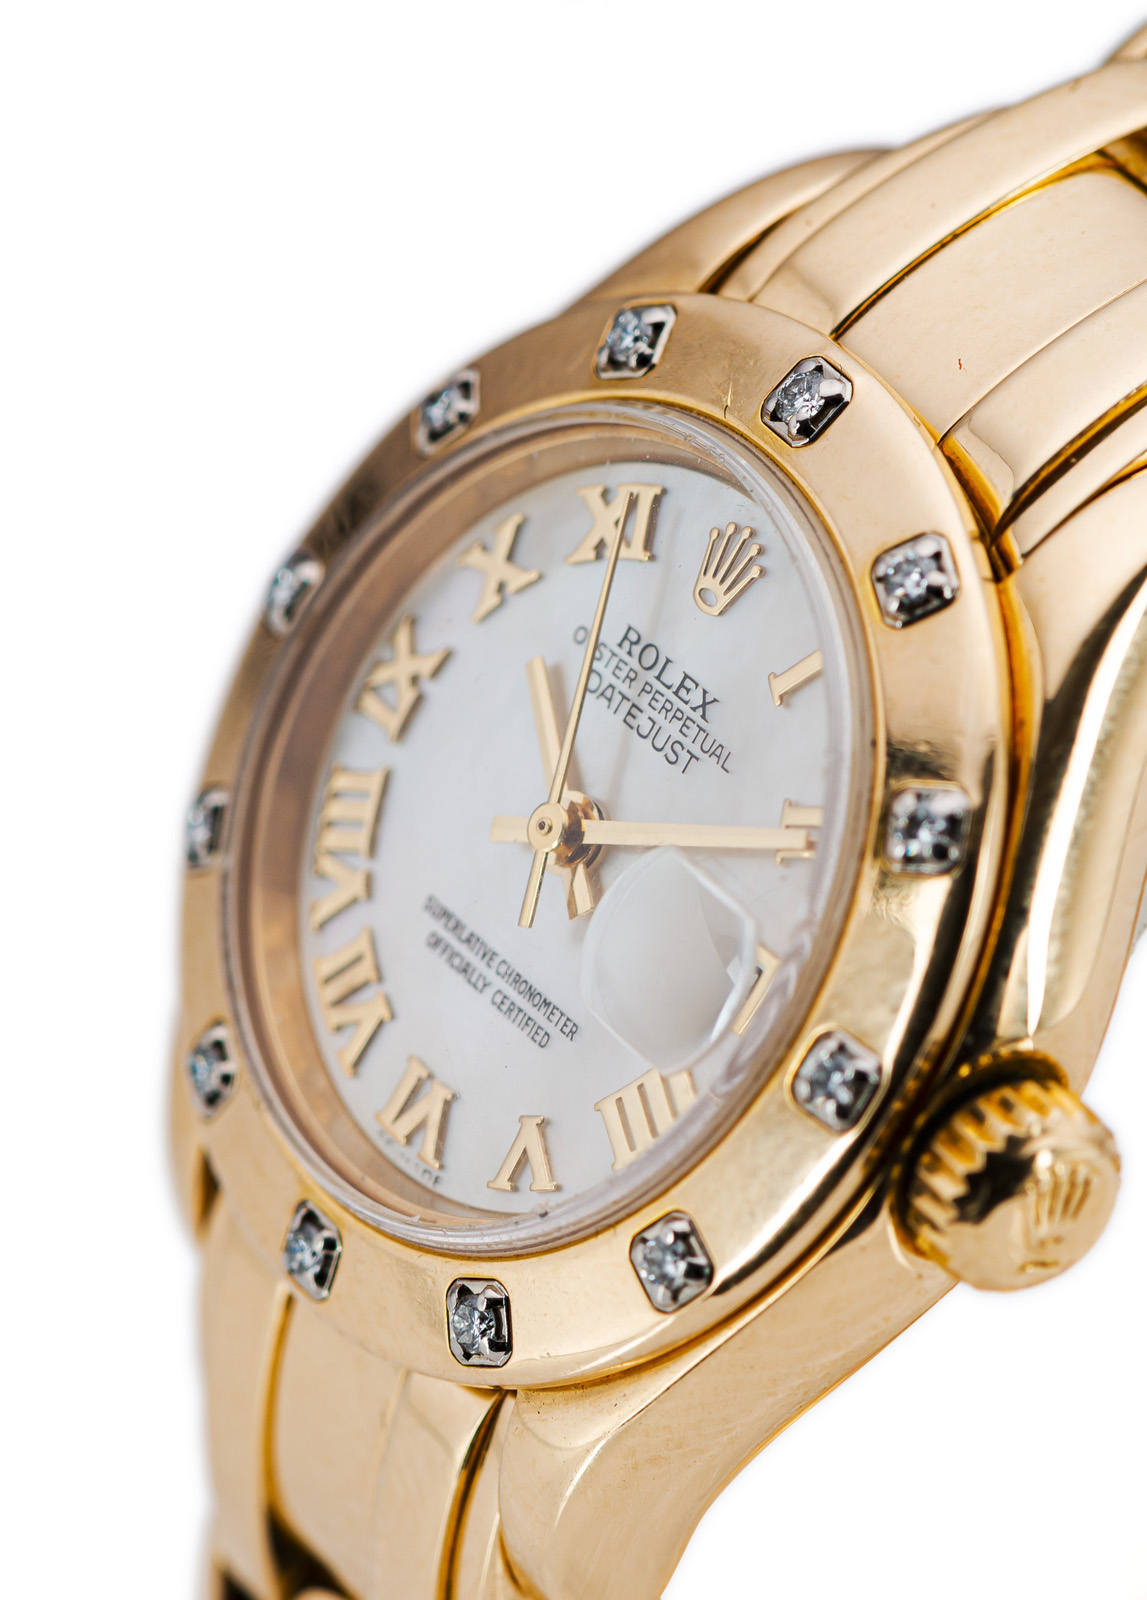 A ROLEX LADY'S WATCH - Image 2 of 5